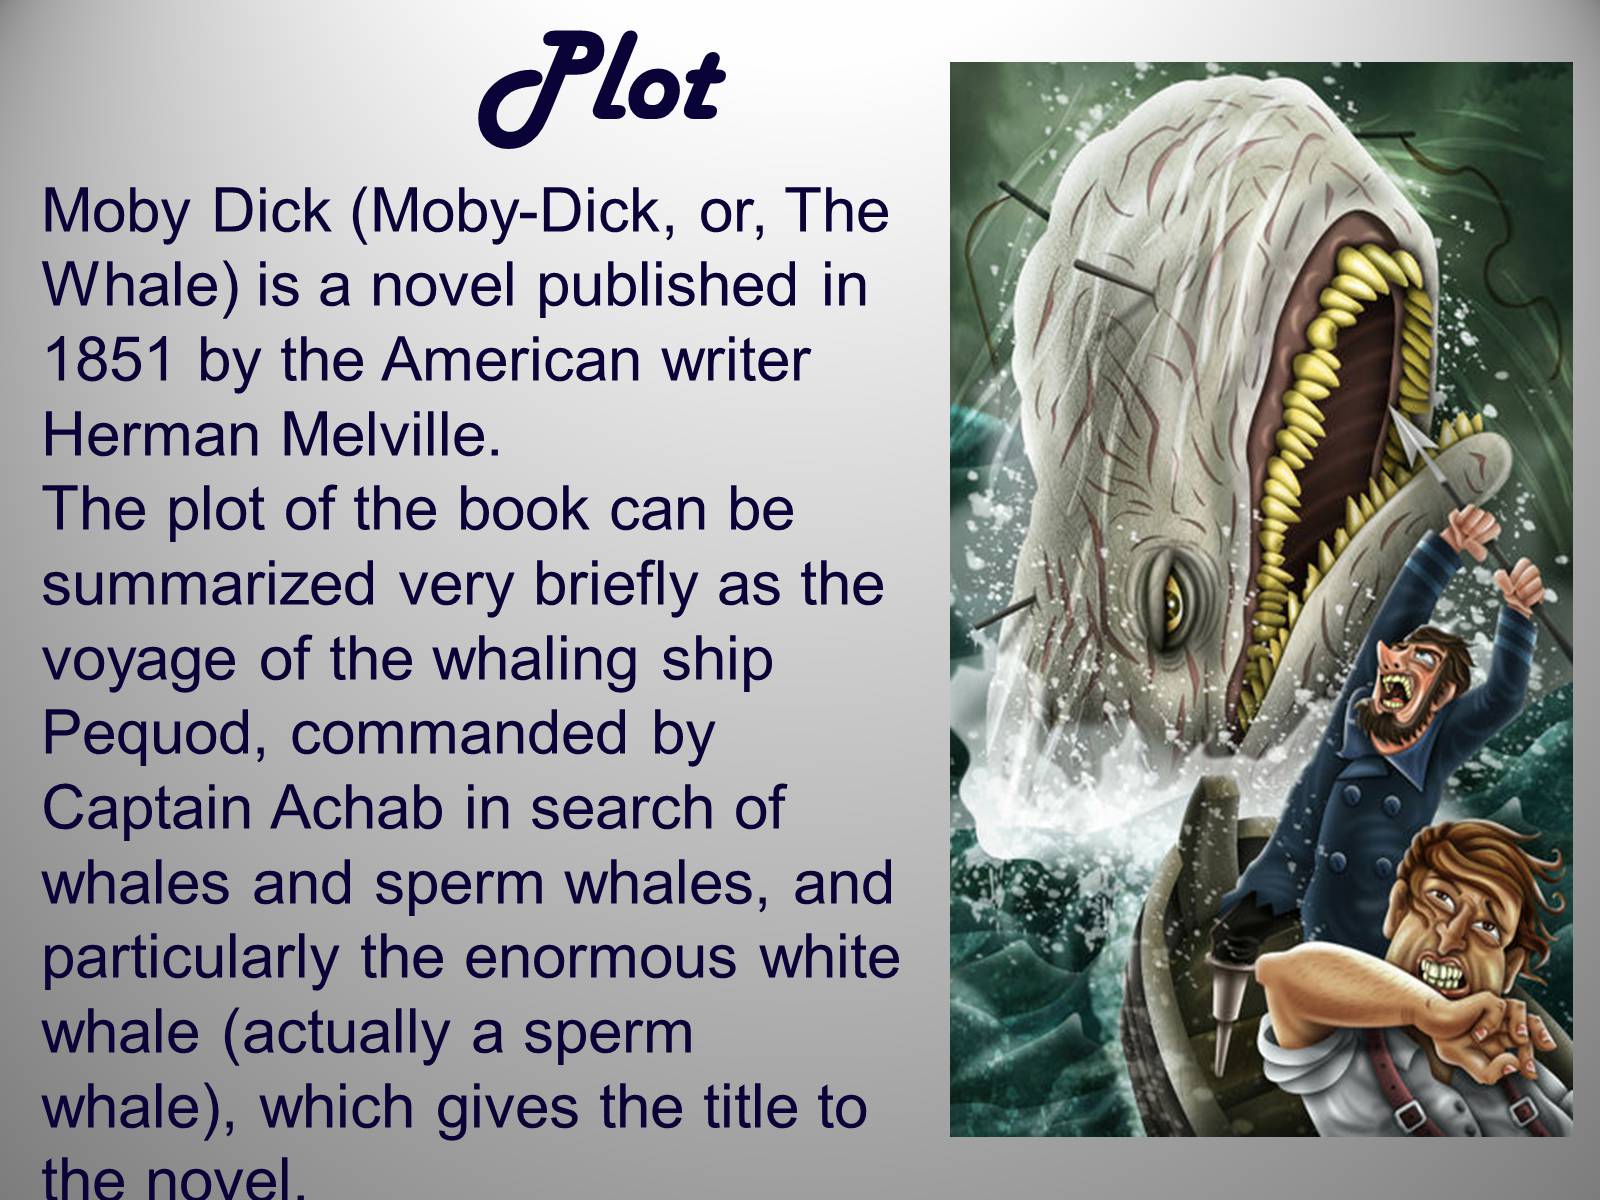 Waws moby dick a naritive